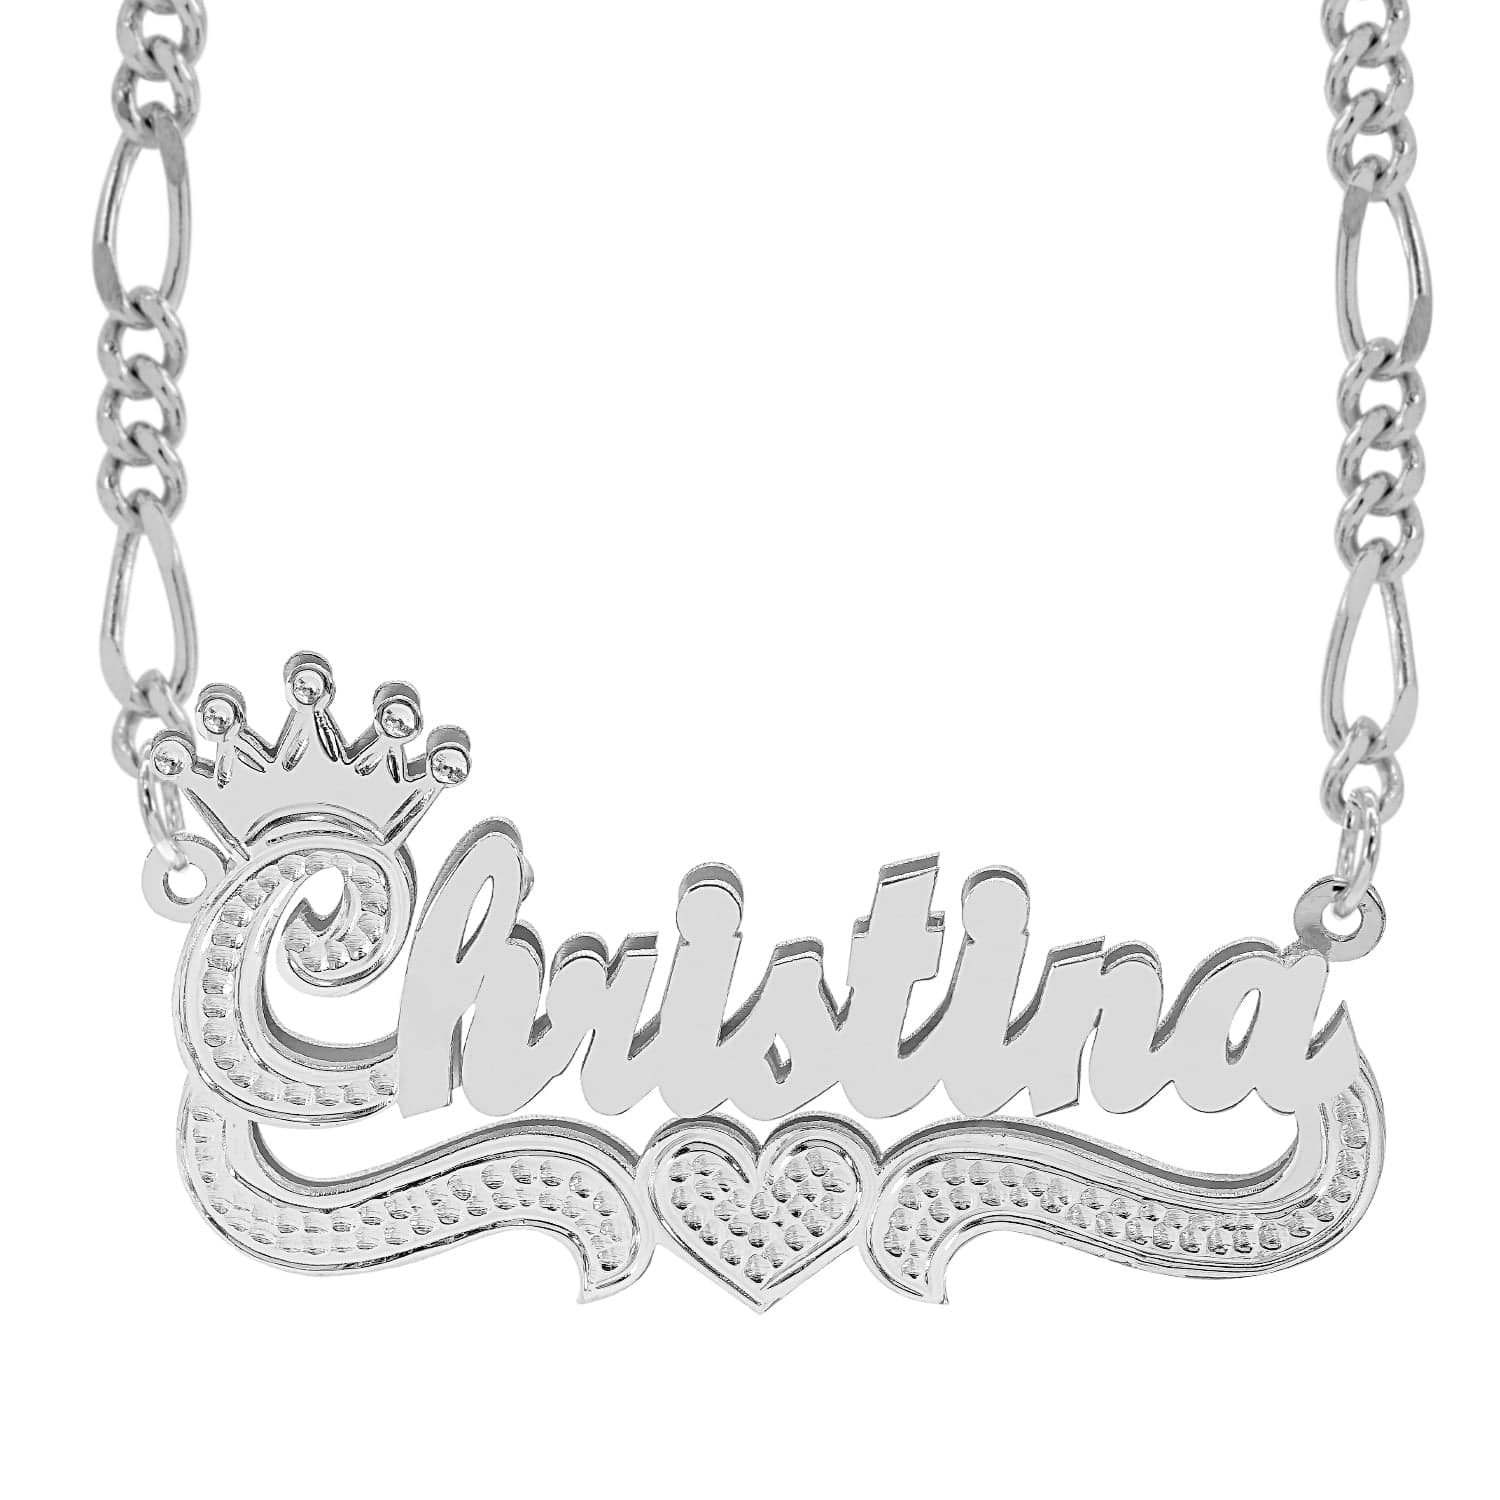 Two-Tone Sterling Silver / Figaro chain Double Plated Name Necklace "Christina" with Figaro chain